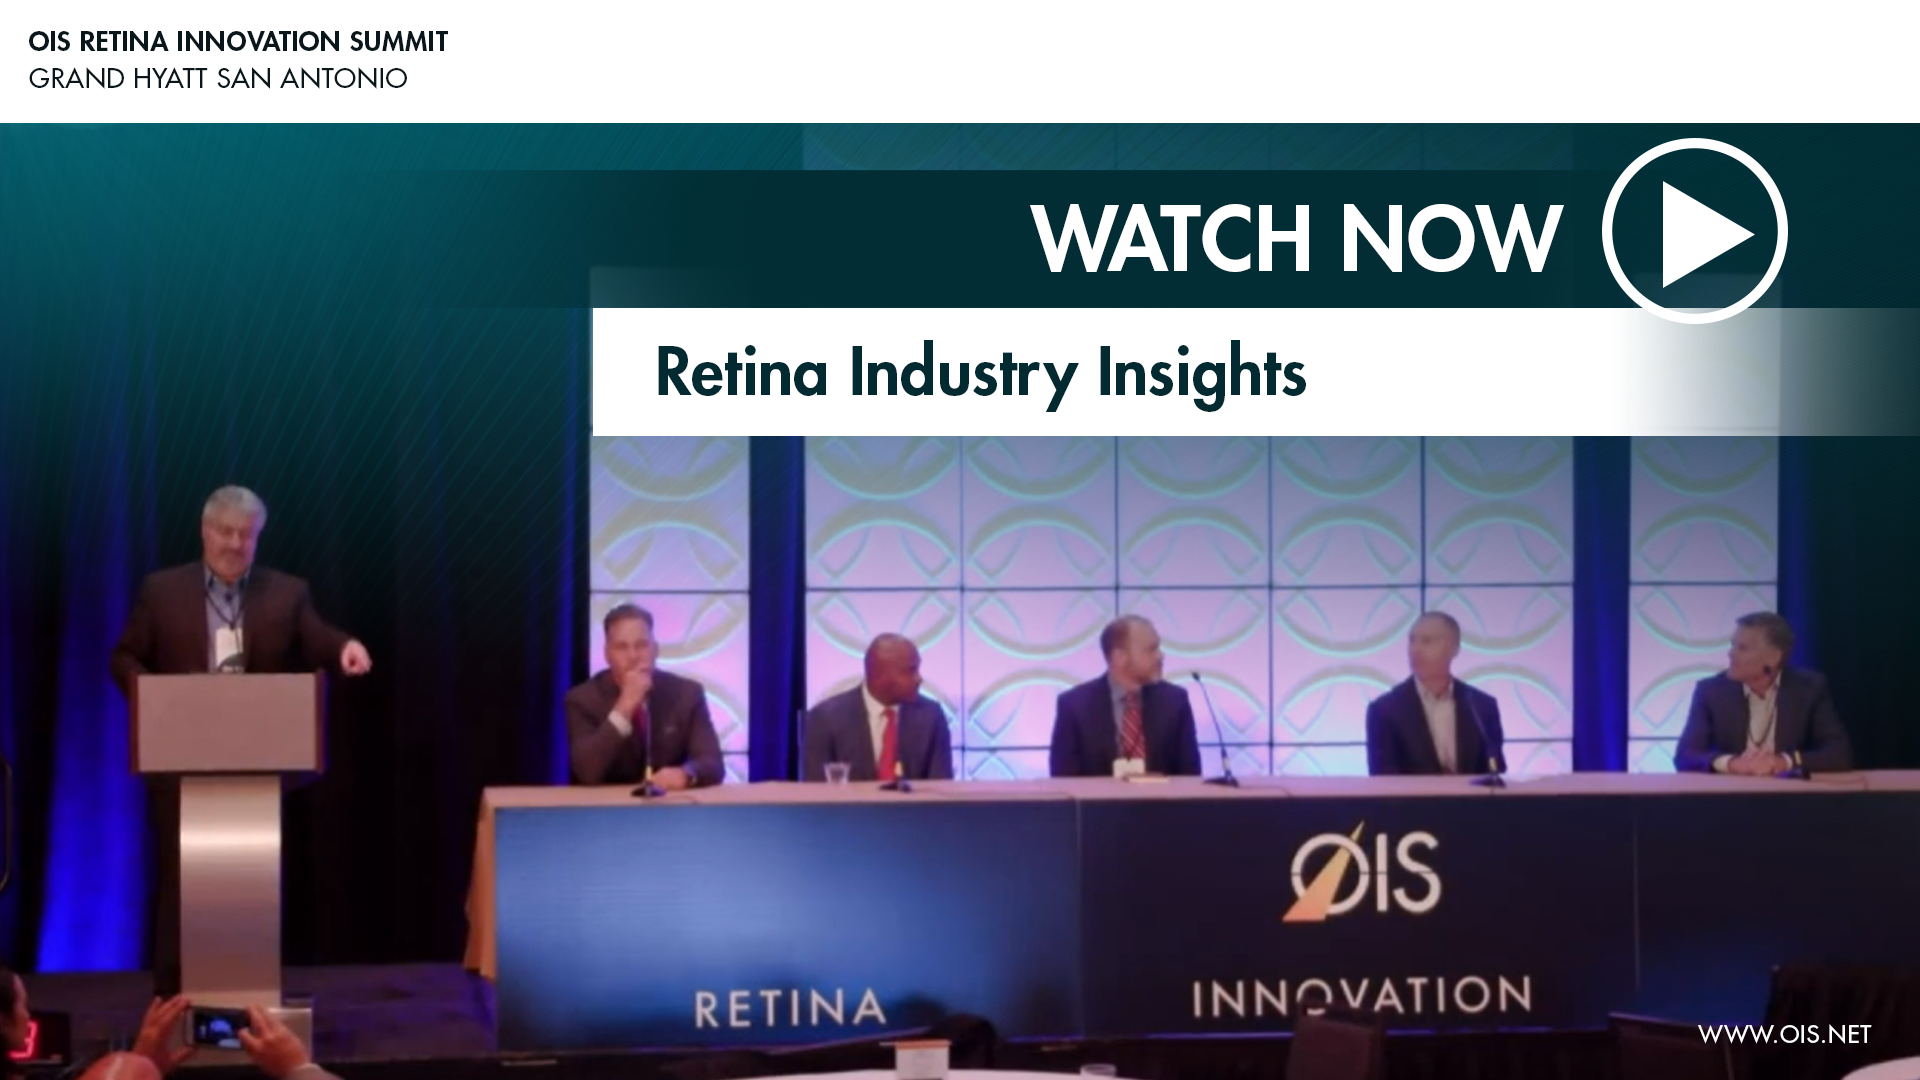 Watch Now - Retina Industry Insights